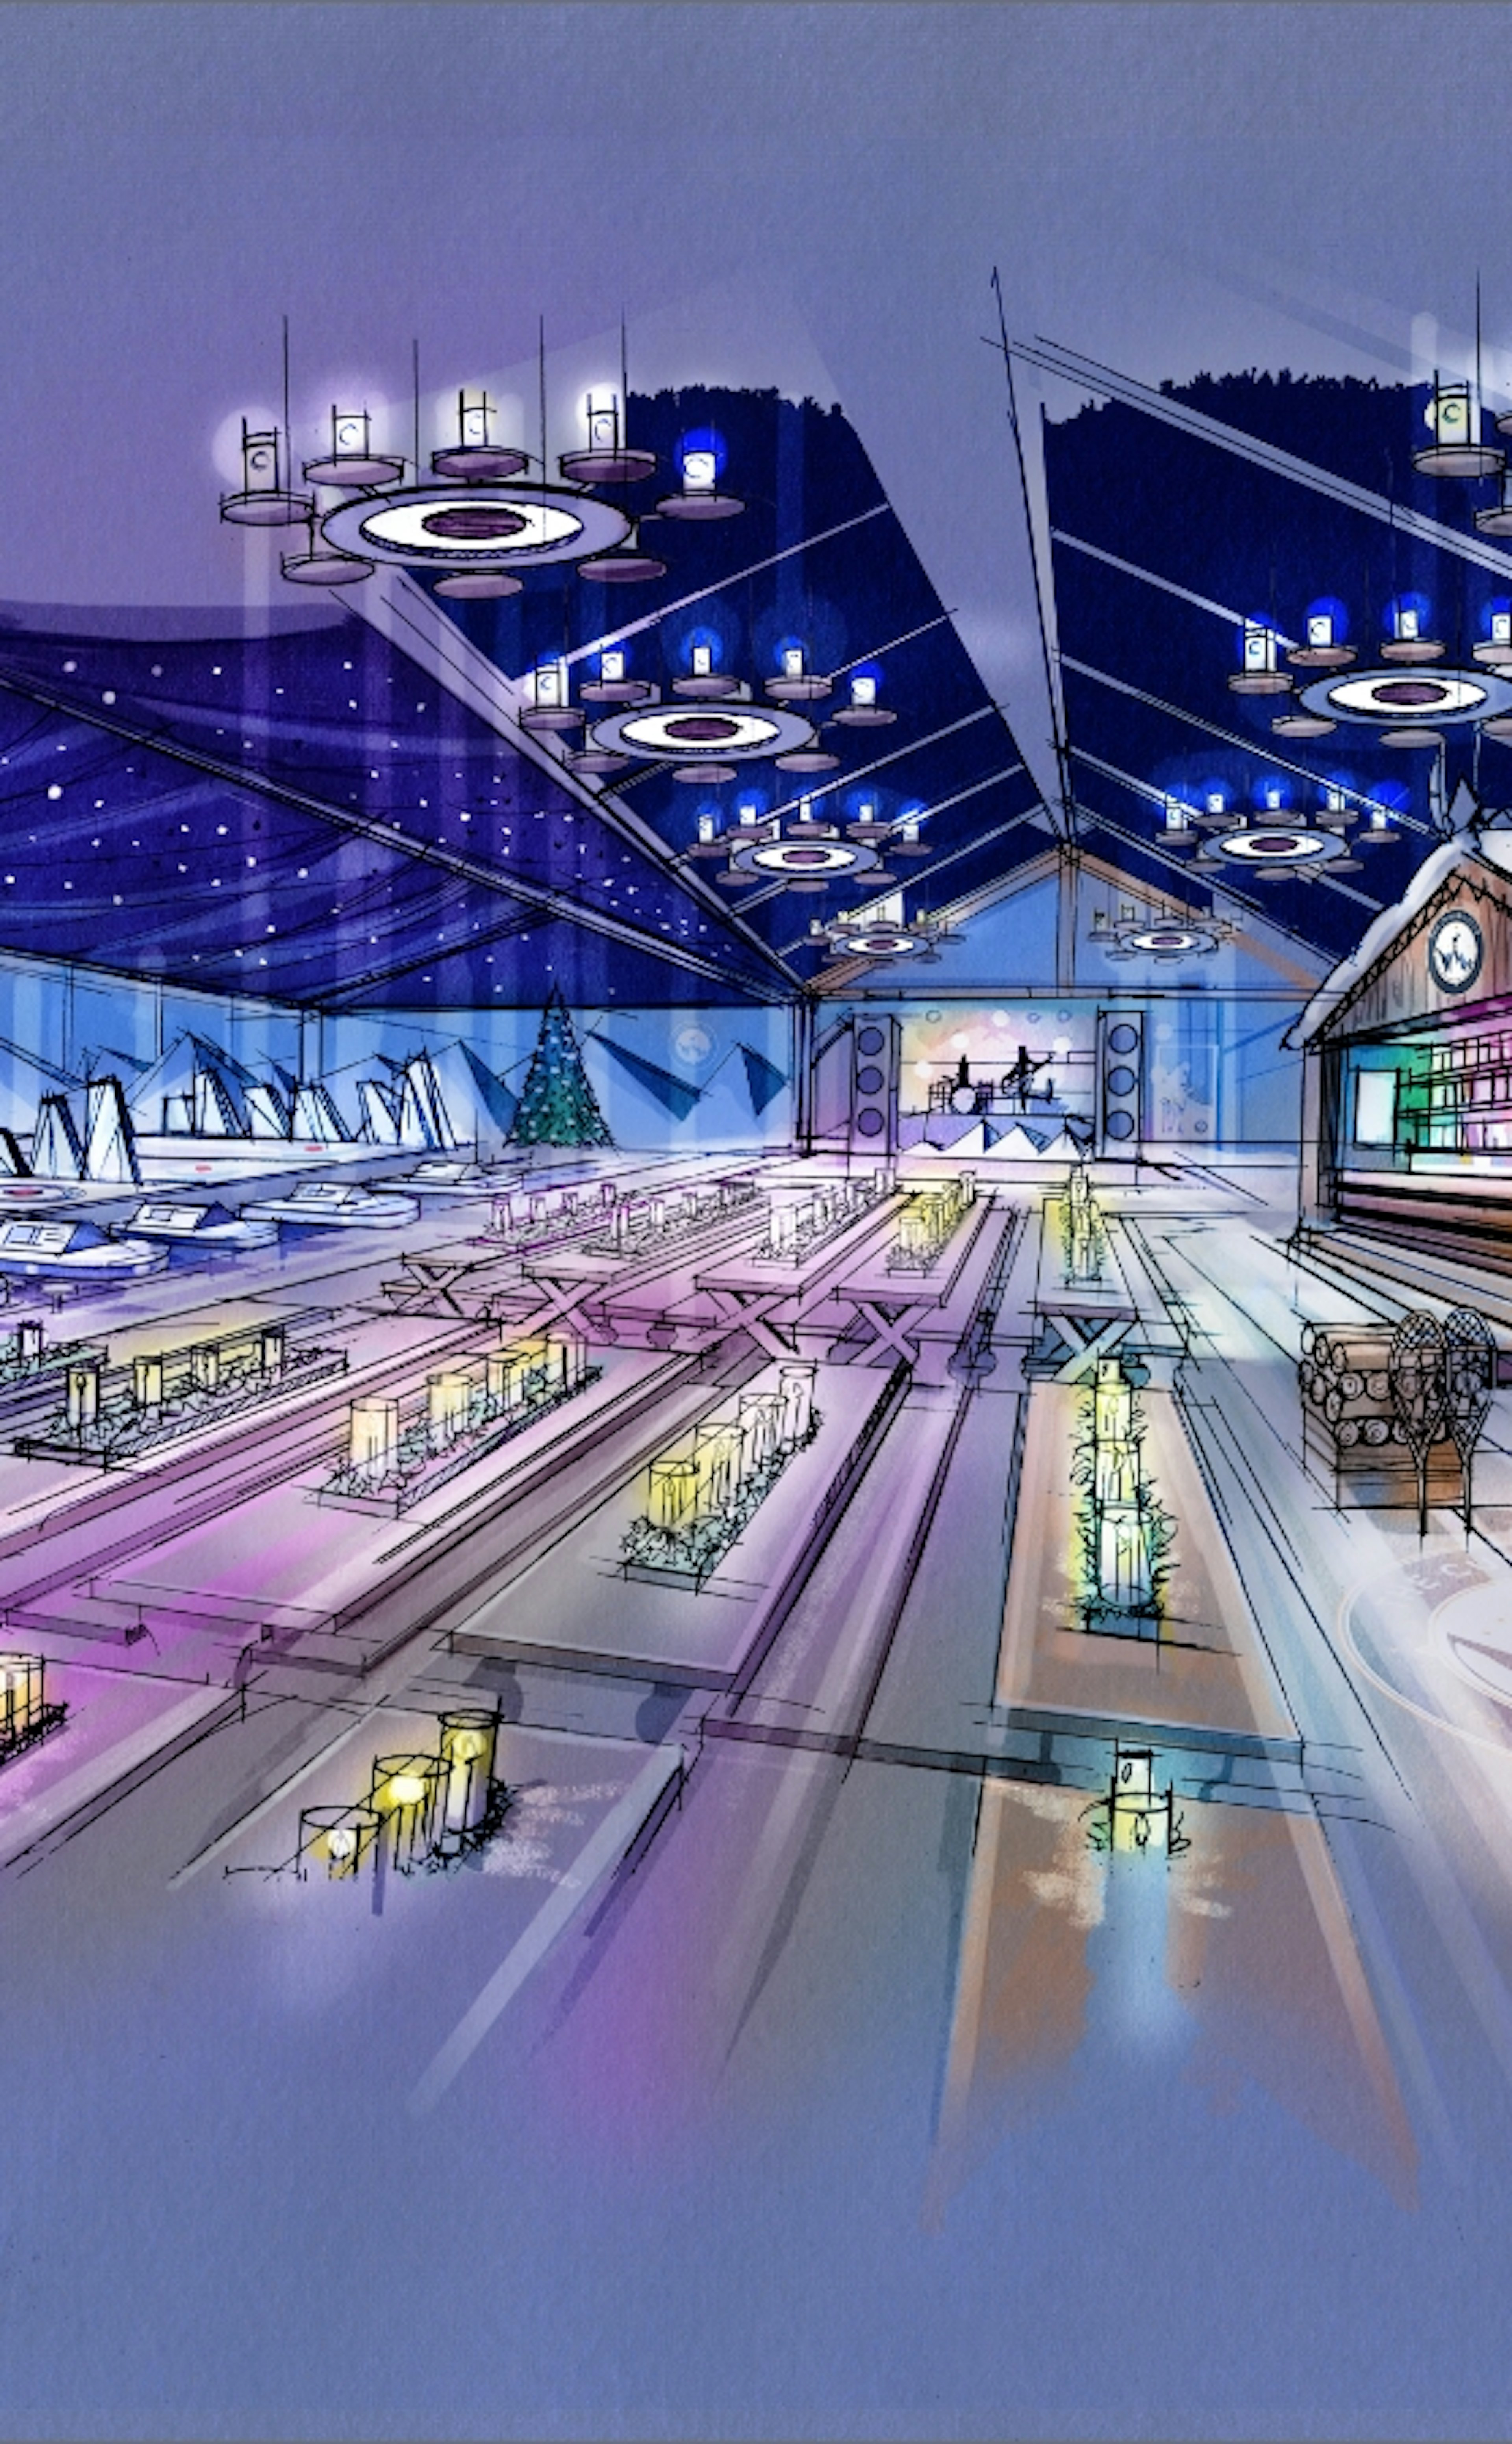 Christmas Office Party Venues - The Curling Club